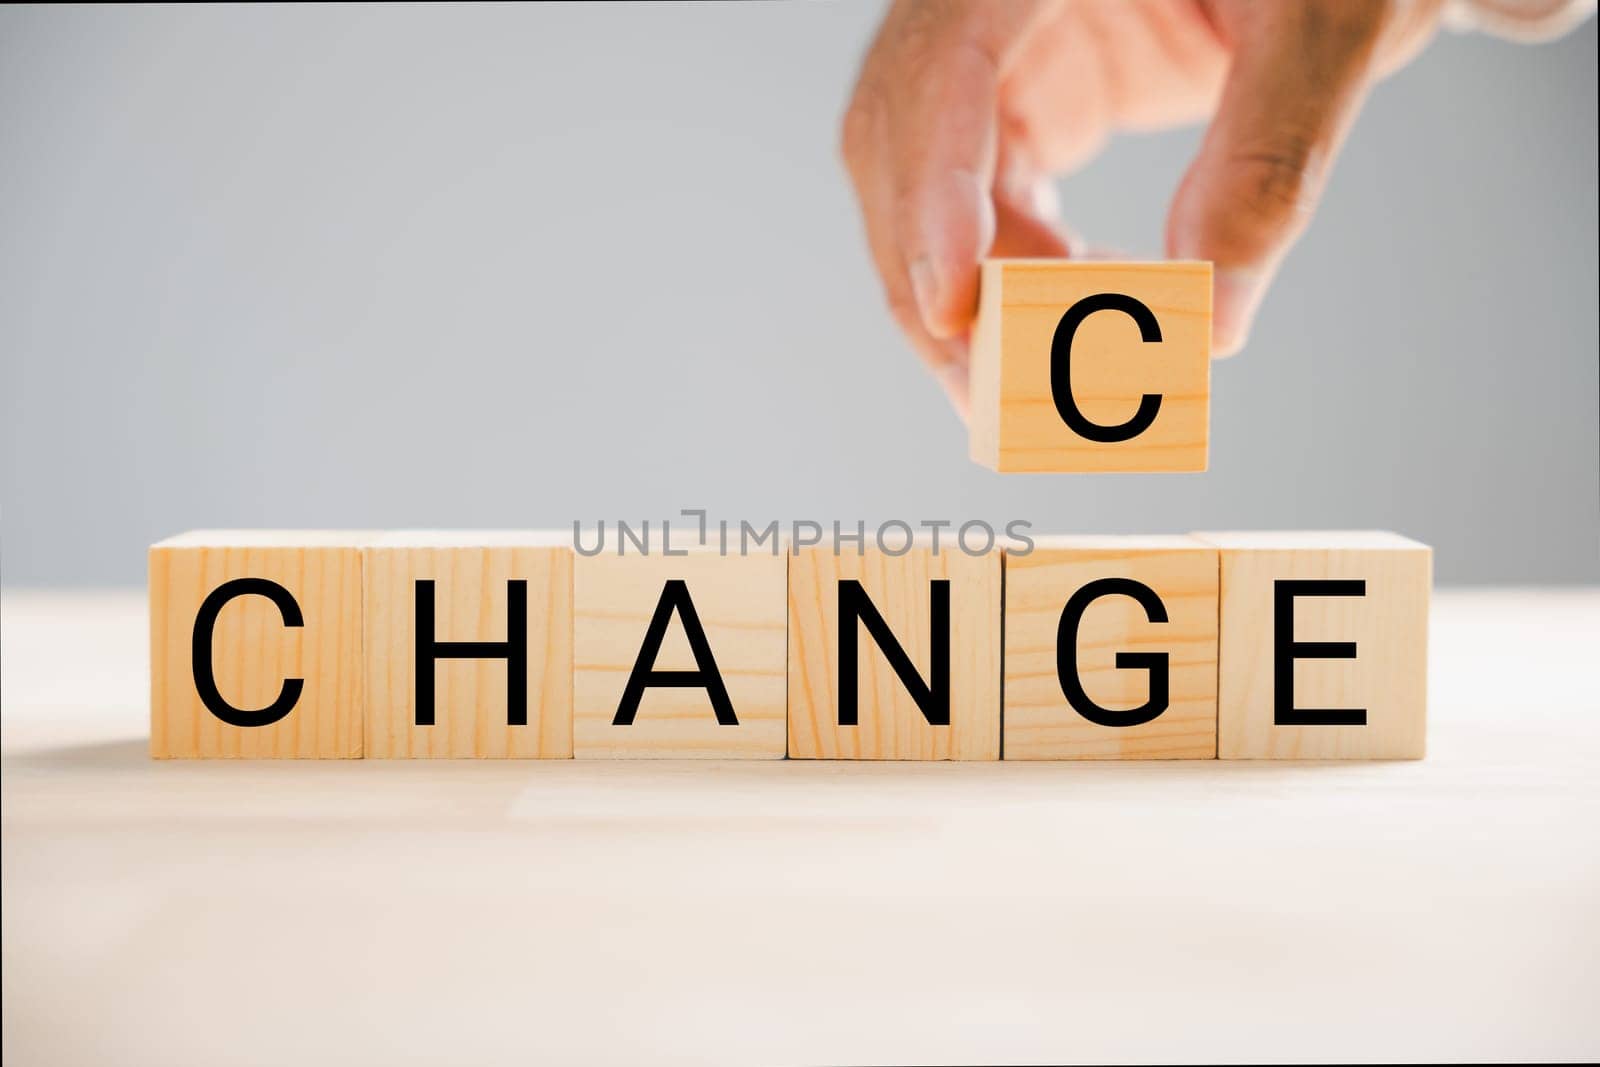 Businessman hand flips wood block, changing CHANGE to CHANCE. Success, strategy, and positive mindset emphasized. Vintage table adds character. Change is evident.